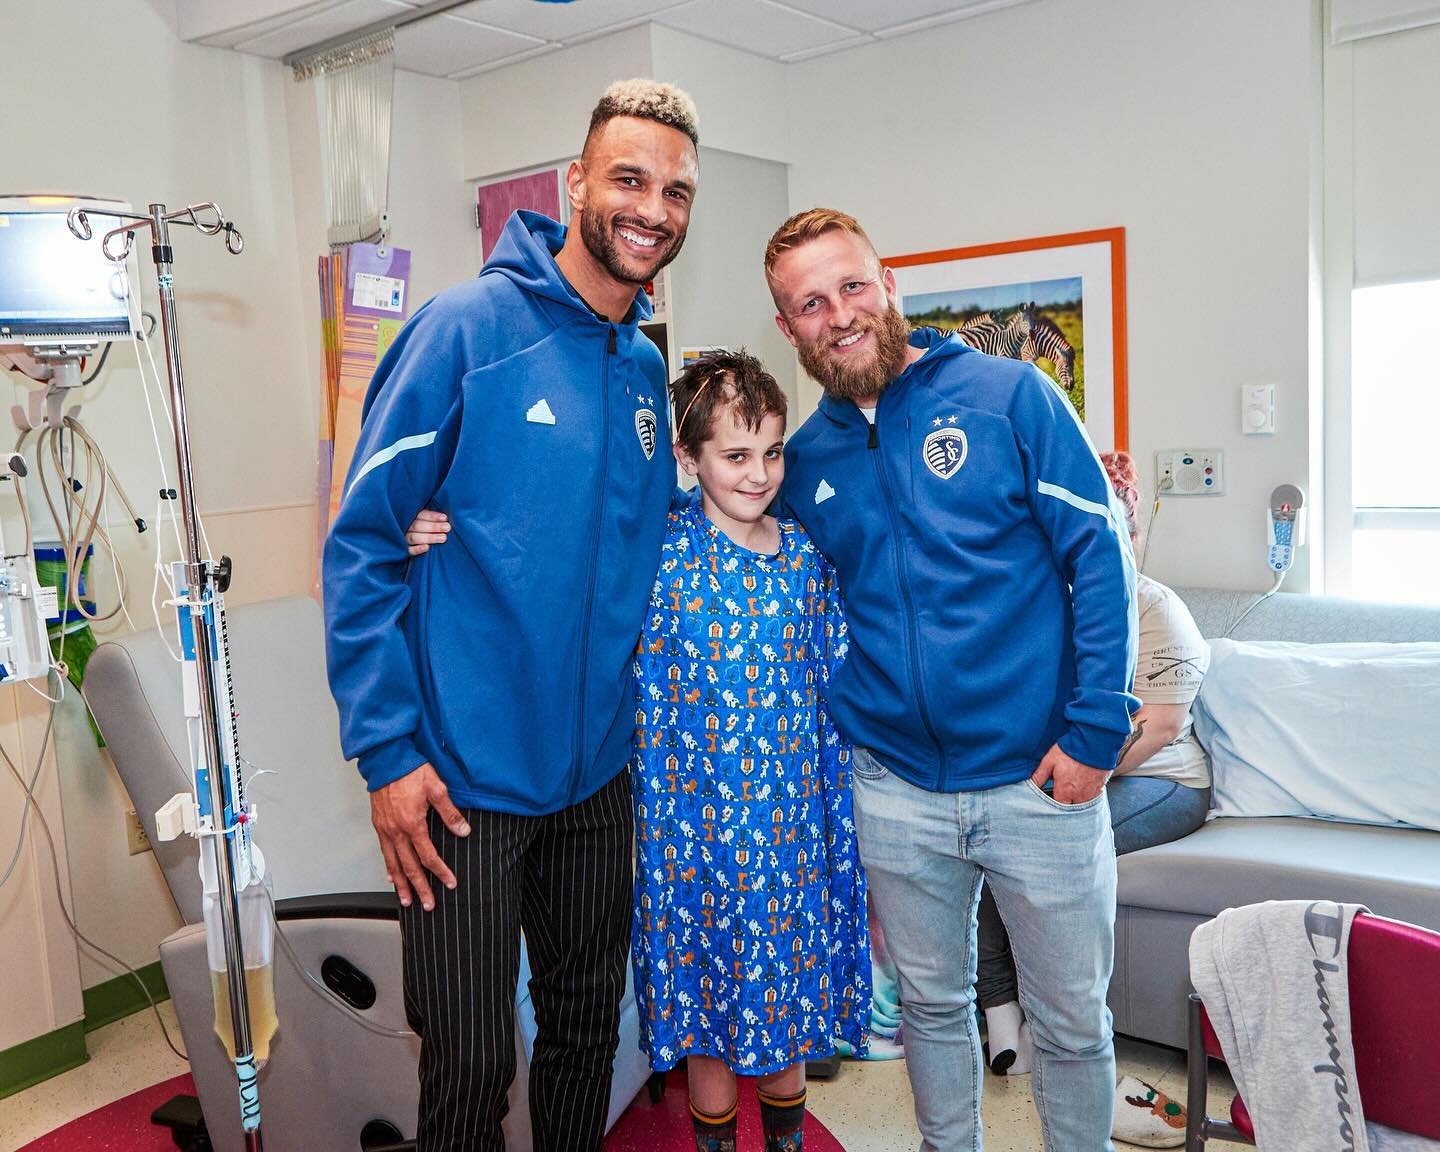 Bringing smiles &amp; strength 😊💪

For this month's visit to @childrensmercy, Johnny and Khiry spent time with patients and hospital workers 💙